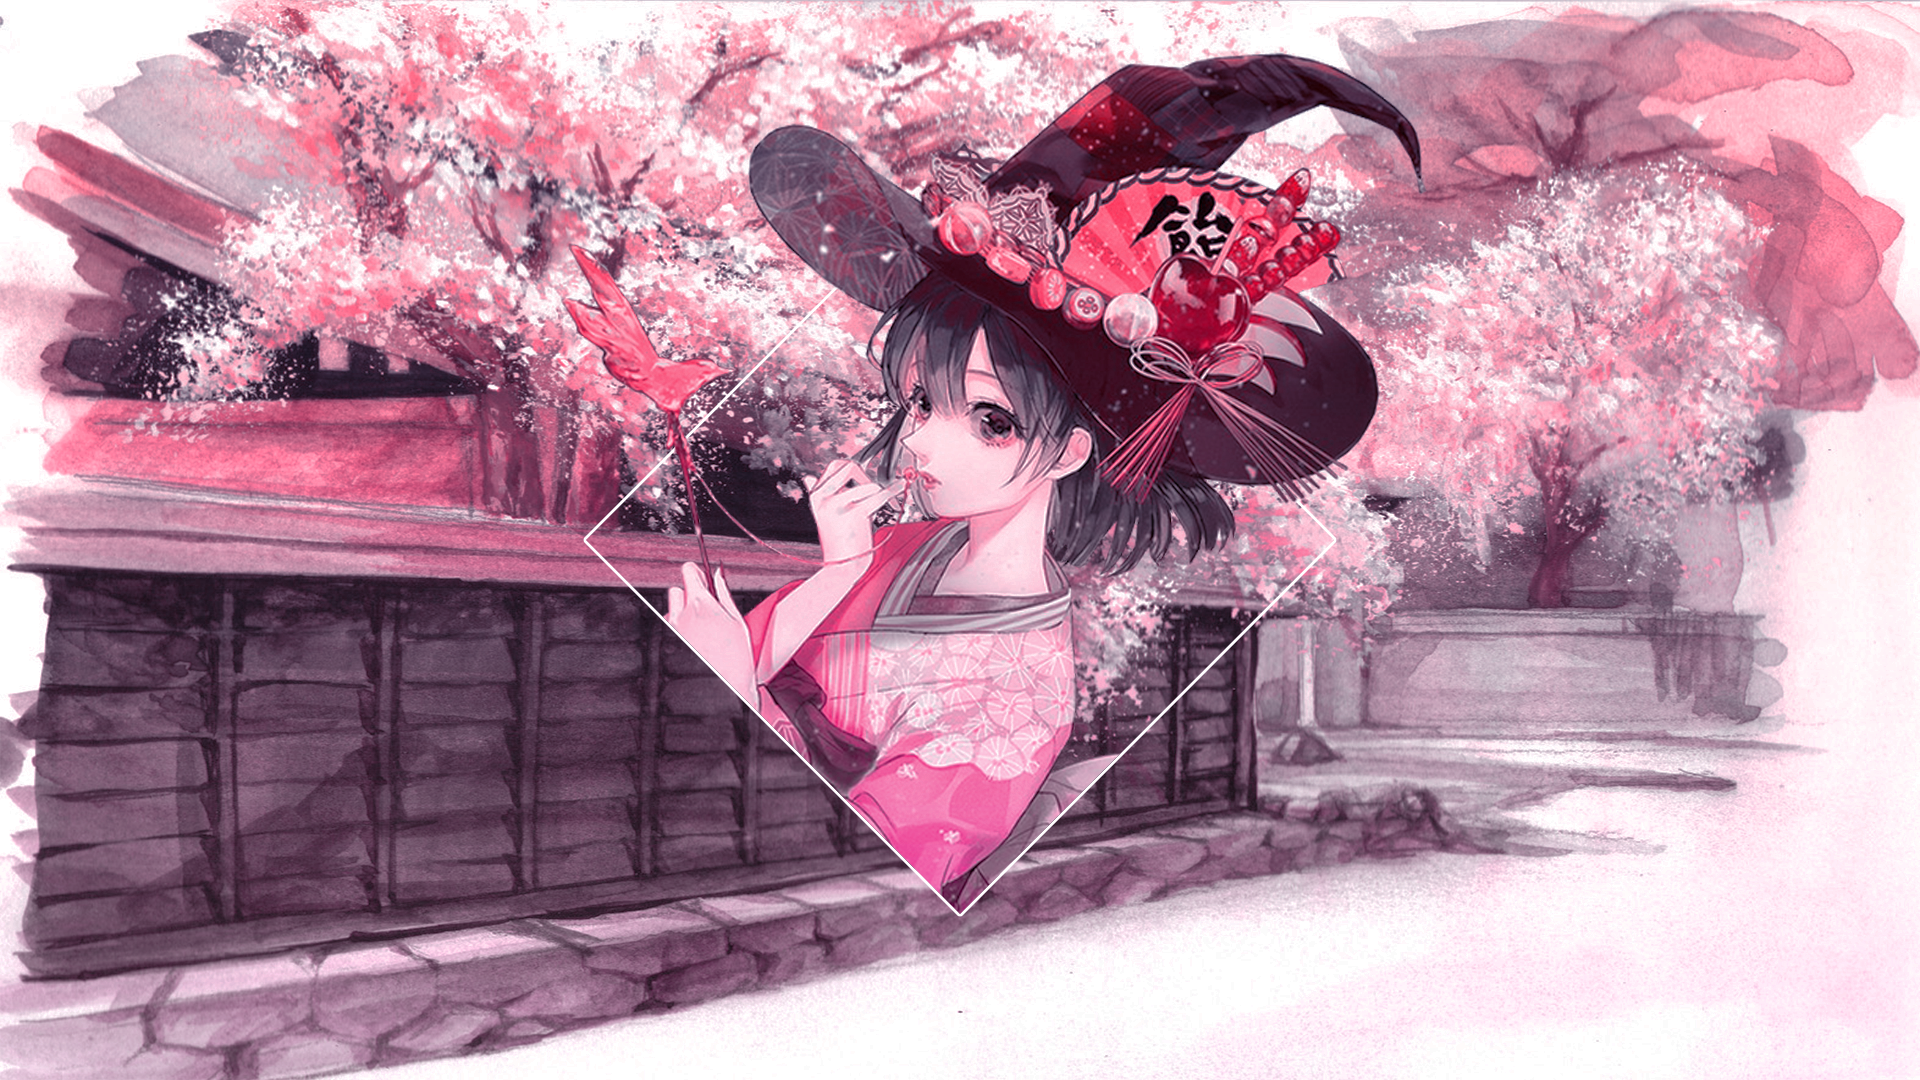 Anime 1920x1080 anime anime girls picture-in-picture landscape digital art witch hat hat